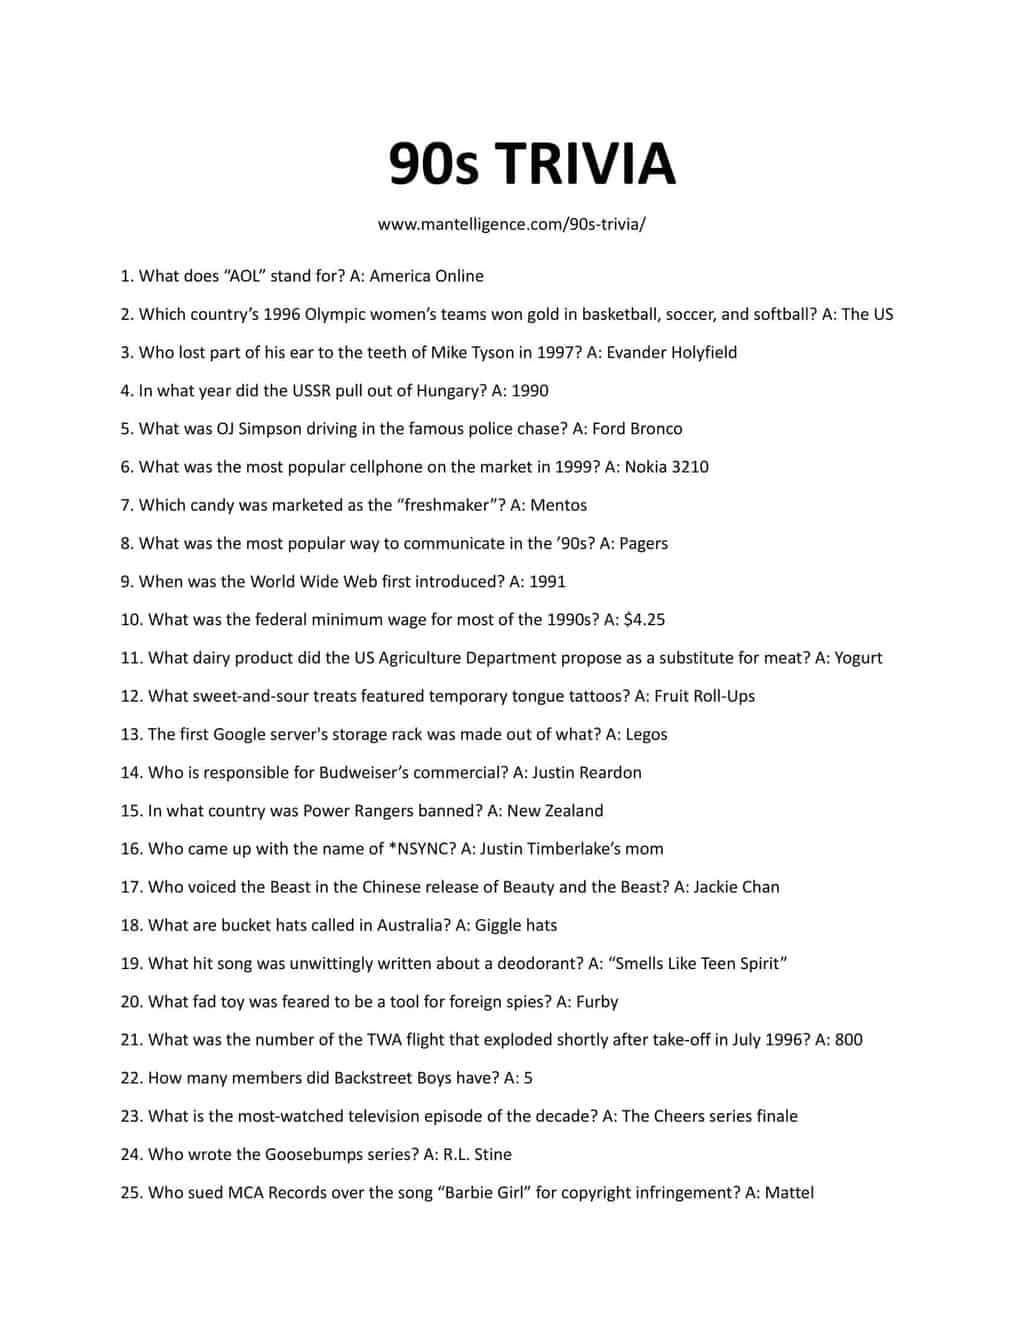 Downloadable and Printable List of 90's Trivia Questions as jpeg or pdf